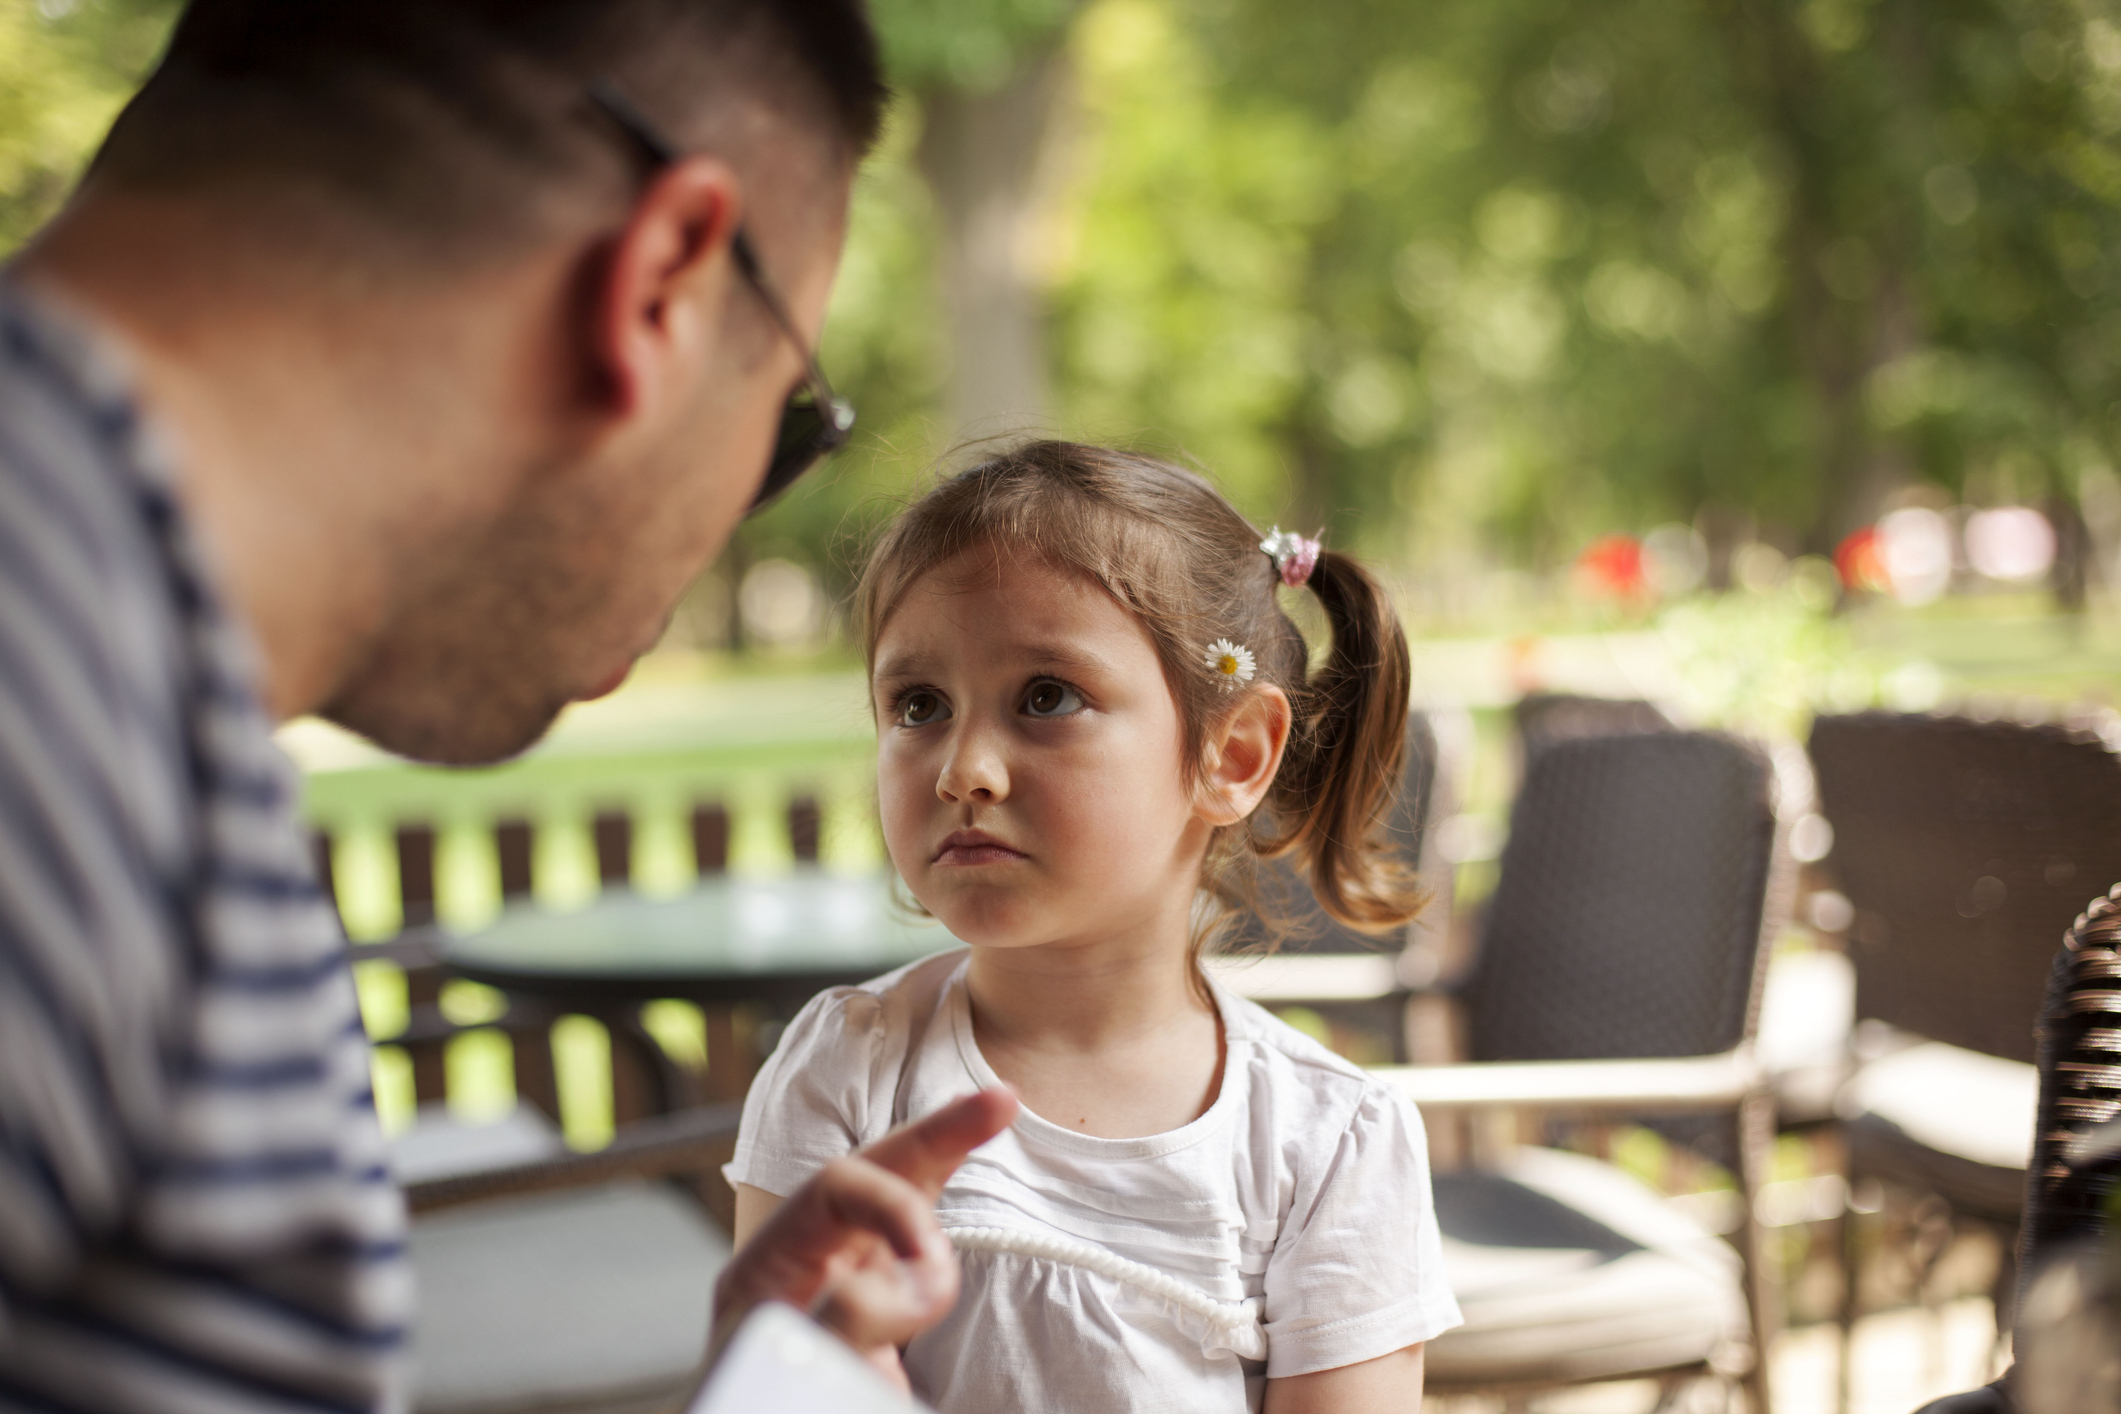 Adult talking to a focused young child outdoors, conveying a parent-child interaction